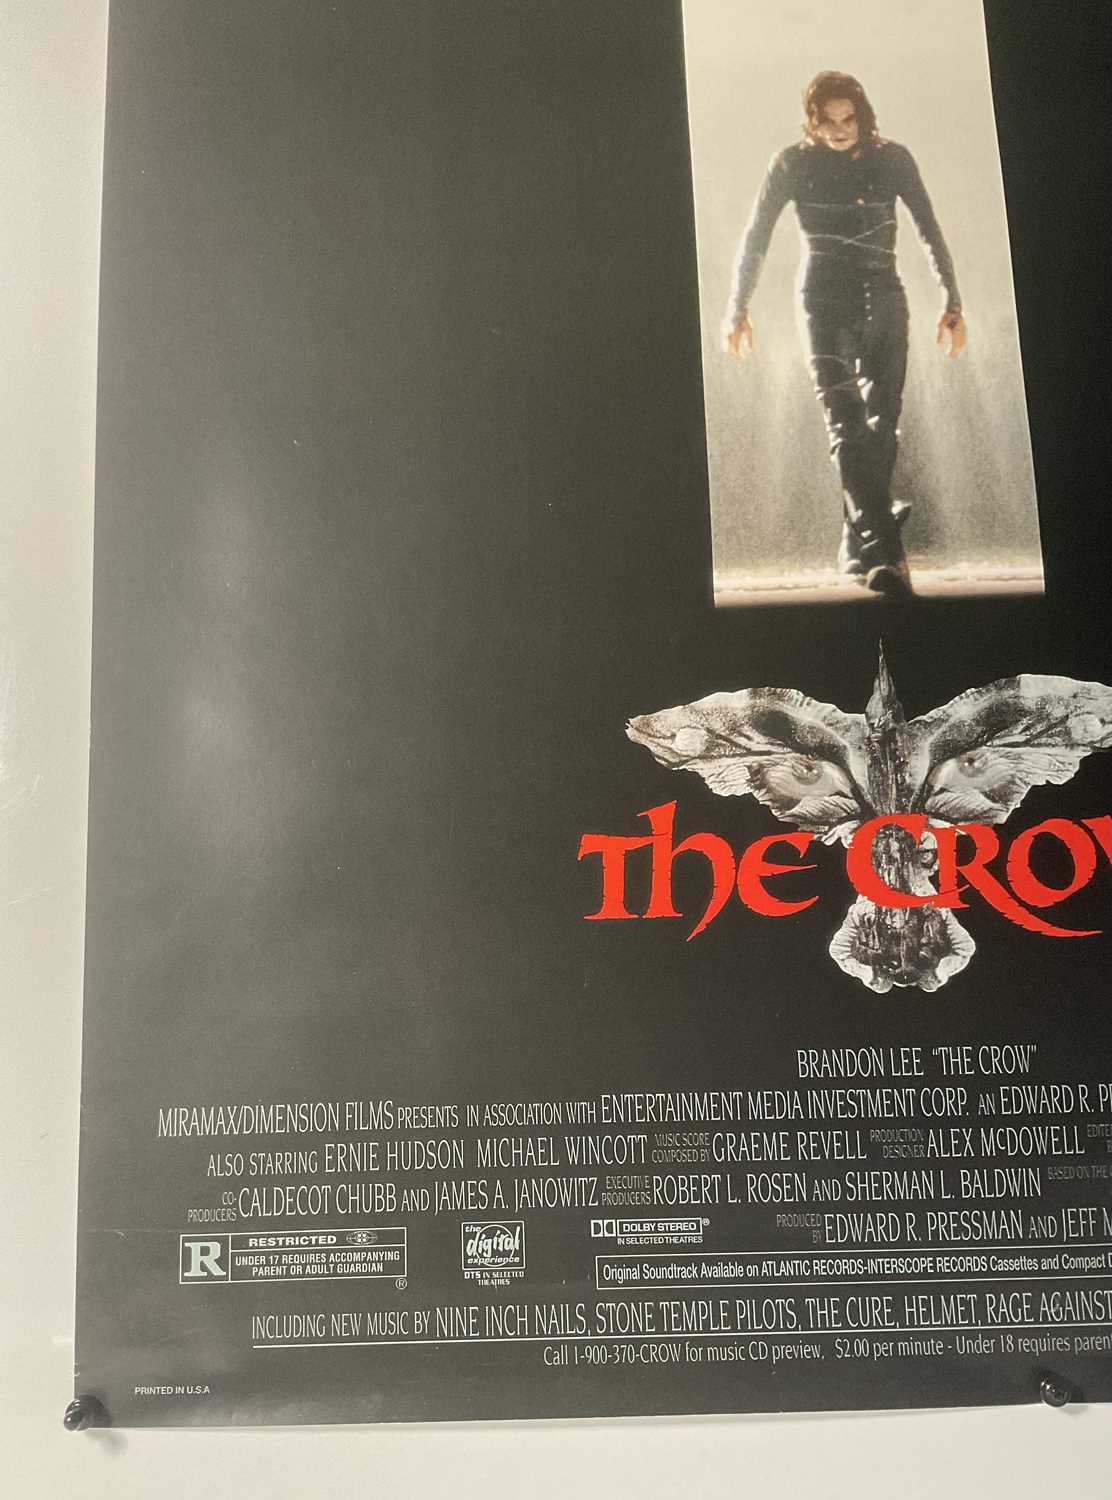 THE CROW (1994) US one-sheet, cult classic starring Brandon Lee in which Lee tragically died - Image 3 of 6